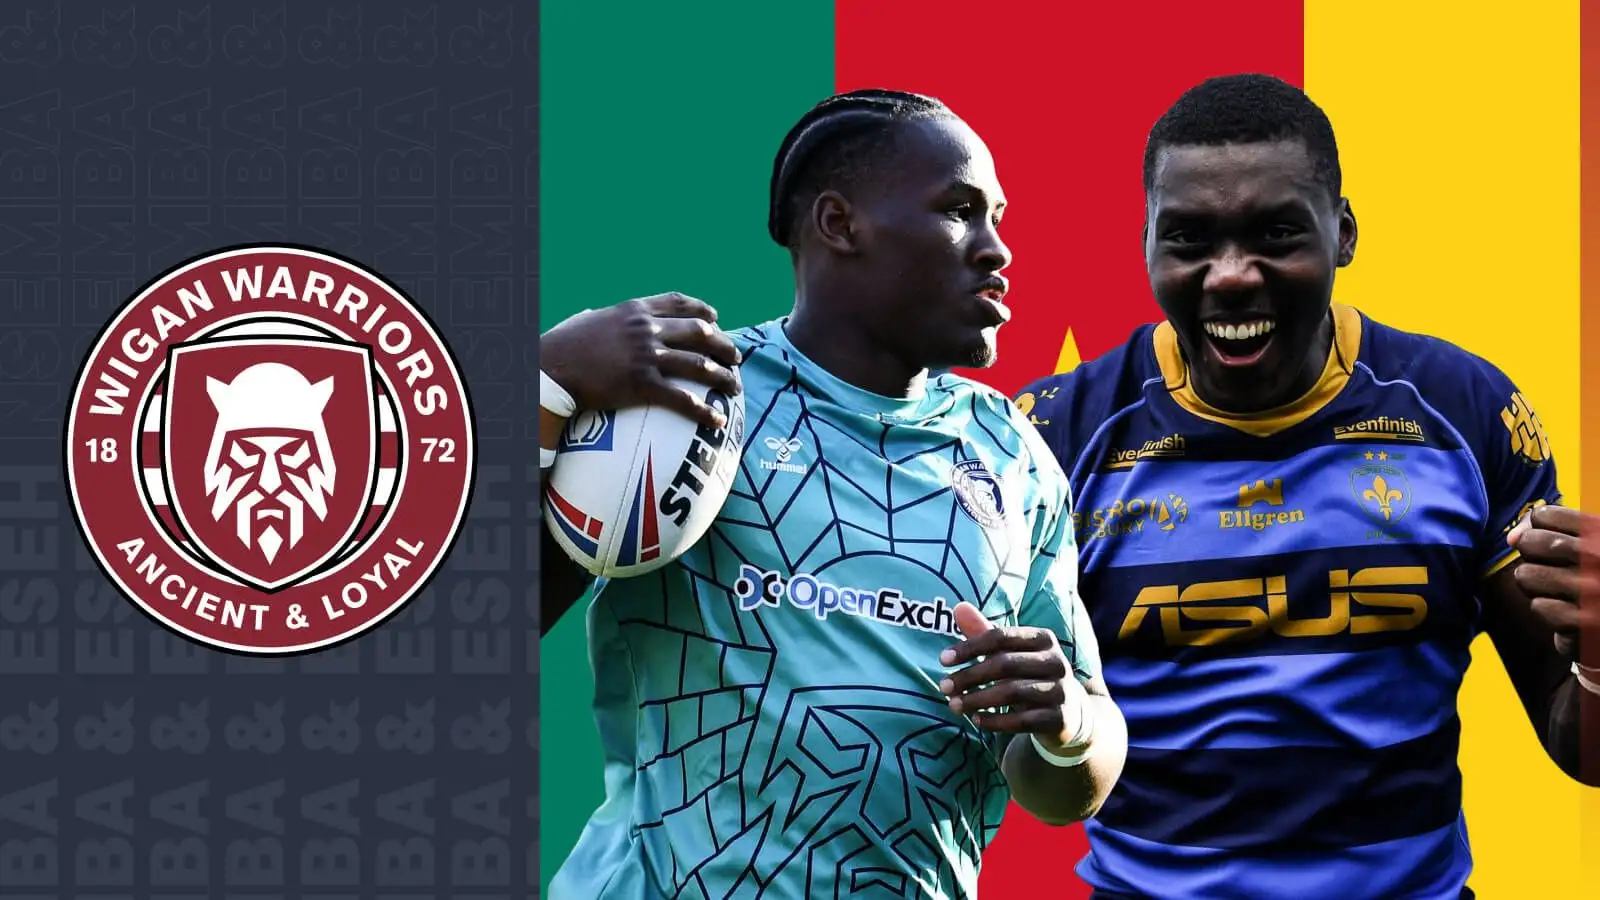 Wigan Warriors exclusive: Meet the Cameroonian ‘brothers’ helping put ancestral homeland on rugby league map